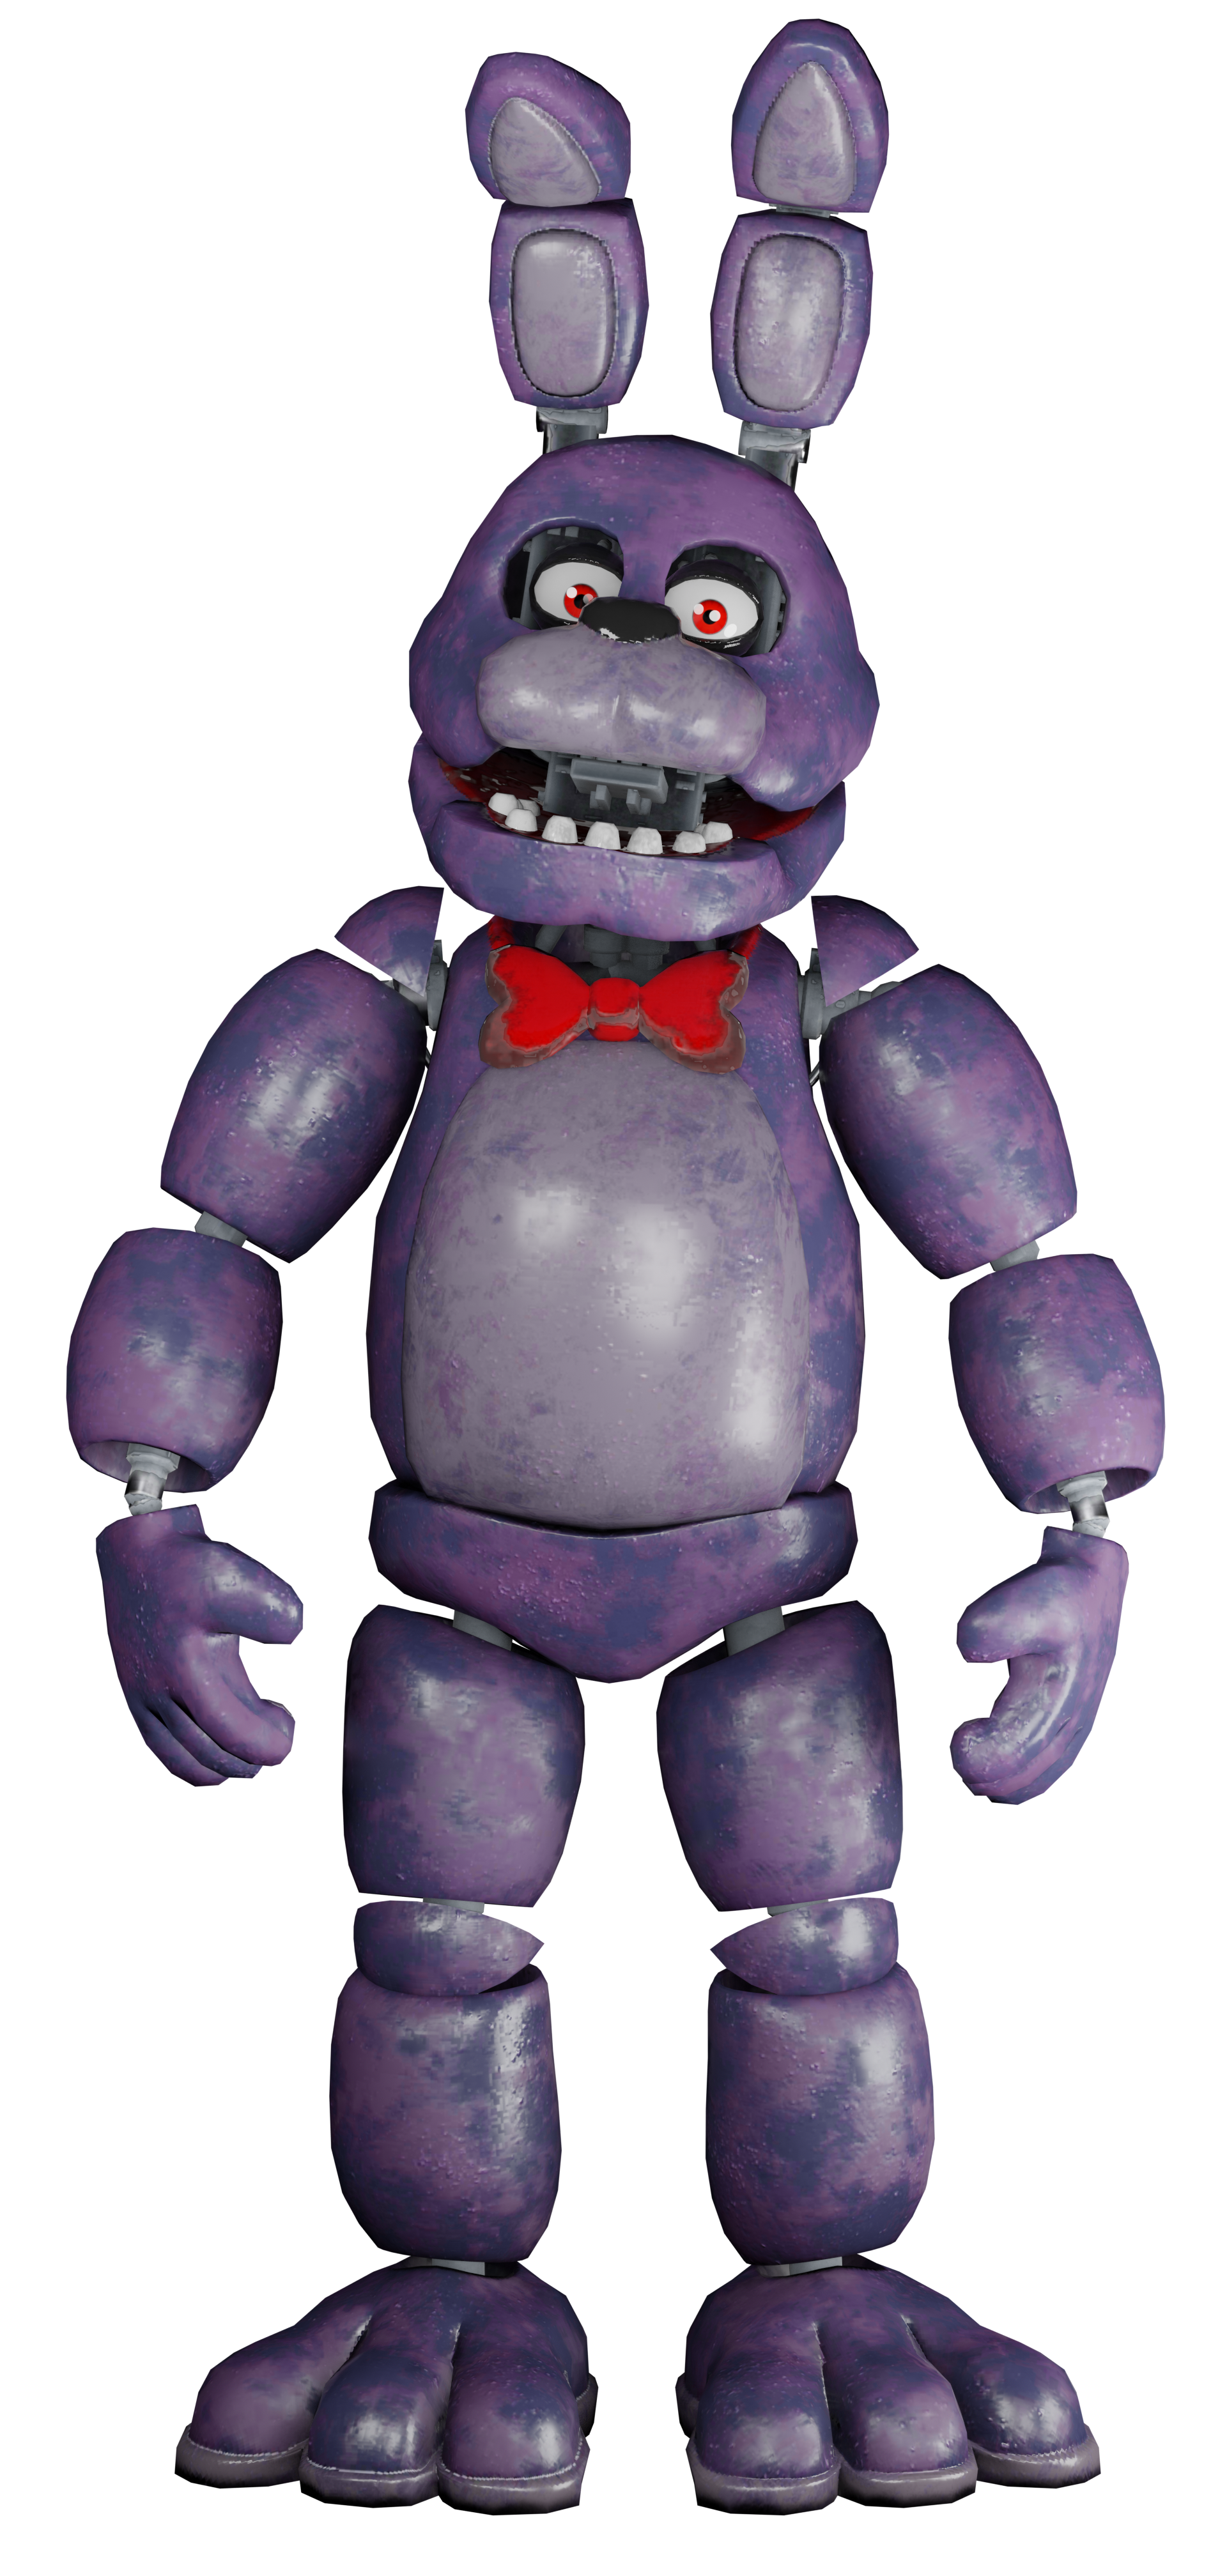 https://static.wikia.nocookie.net/five-nights-at-freddys-ar-special-delivery-wiki/images/1/17/BonnieRed.png/revision/latest?cb=20220910221926